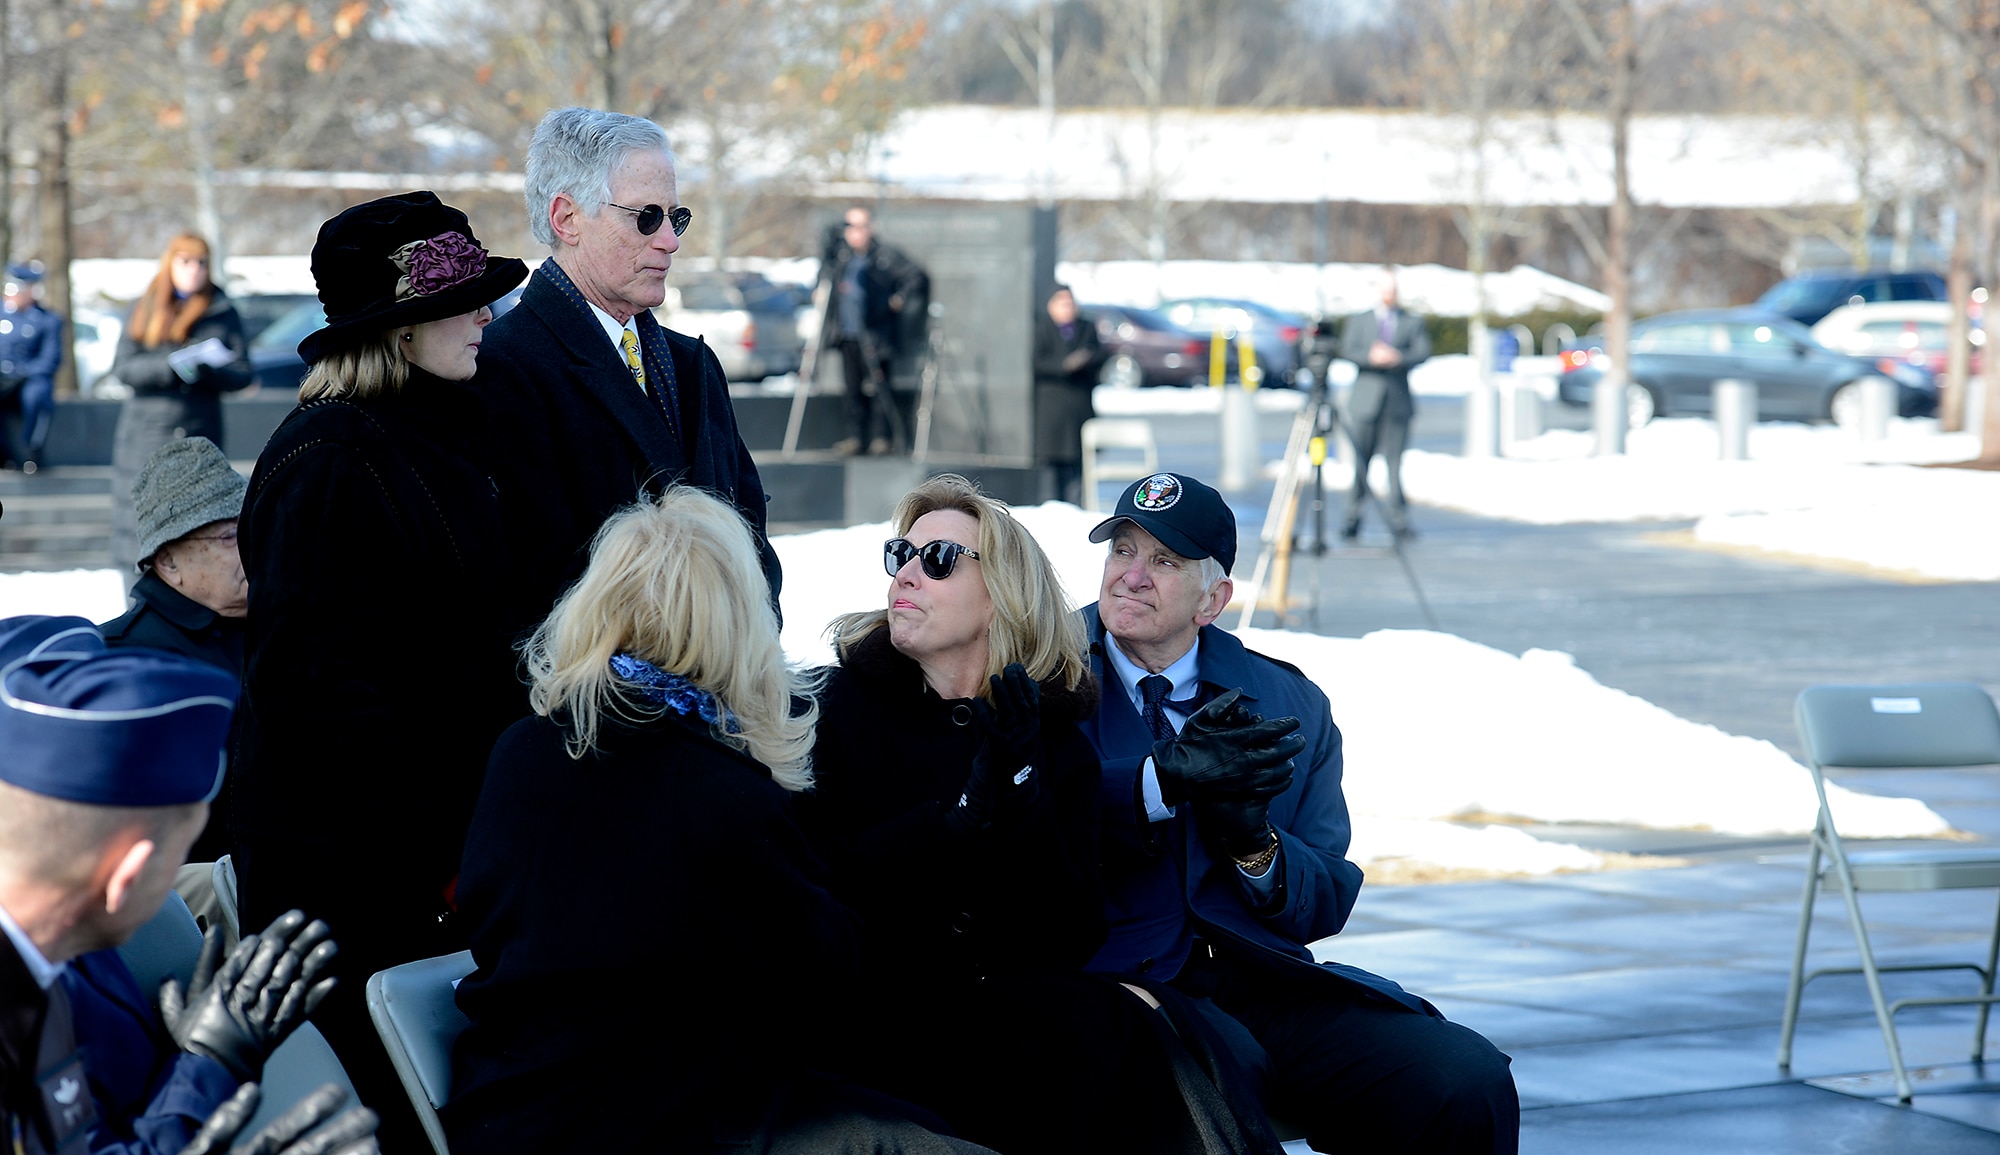 Secretary of the Air Force Deborah Lee James (seated bottom right) thanks Bob Brudno and his wife, Sheila, during a wreath laying ceremony March 2, 2015, hosted by Air Force Chief of Staff Gen. Mark A. Welsh III, honoring Air Force Vietnam prisoners of war and missing in action at the Air Force Memorial in Arlington, Va.  Bob Brudno's brother, Capt. Alan Brudno, was a Vietnam POW. (U.S. Air Force photo/Scott M. Ash)